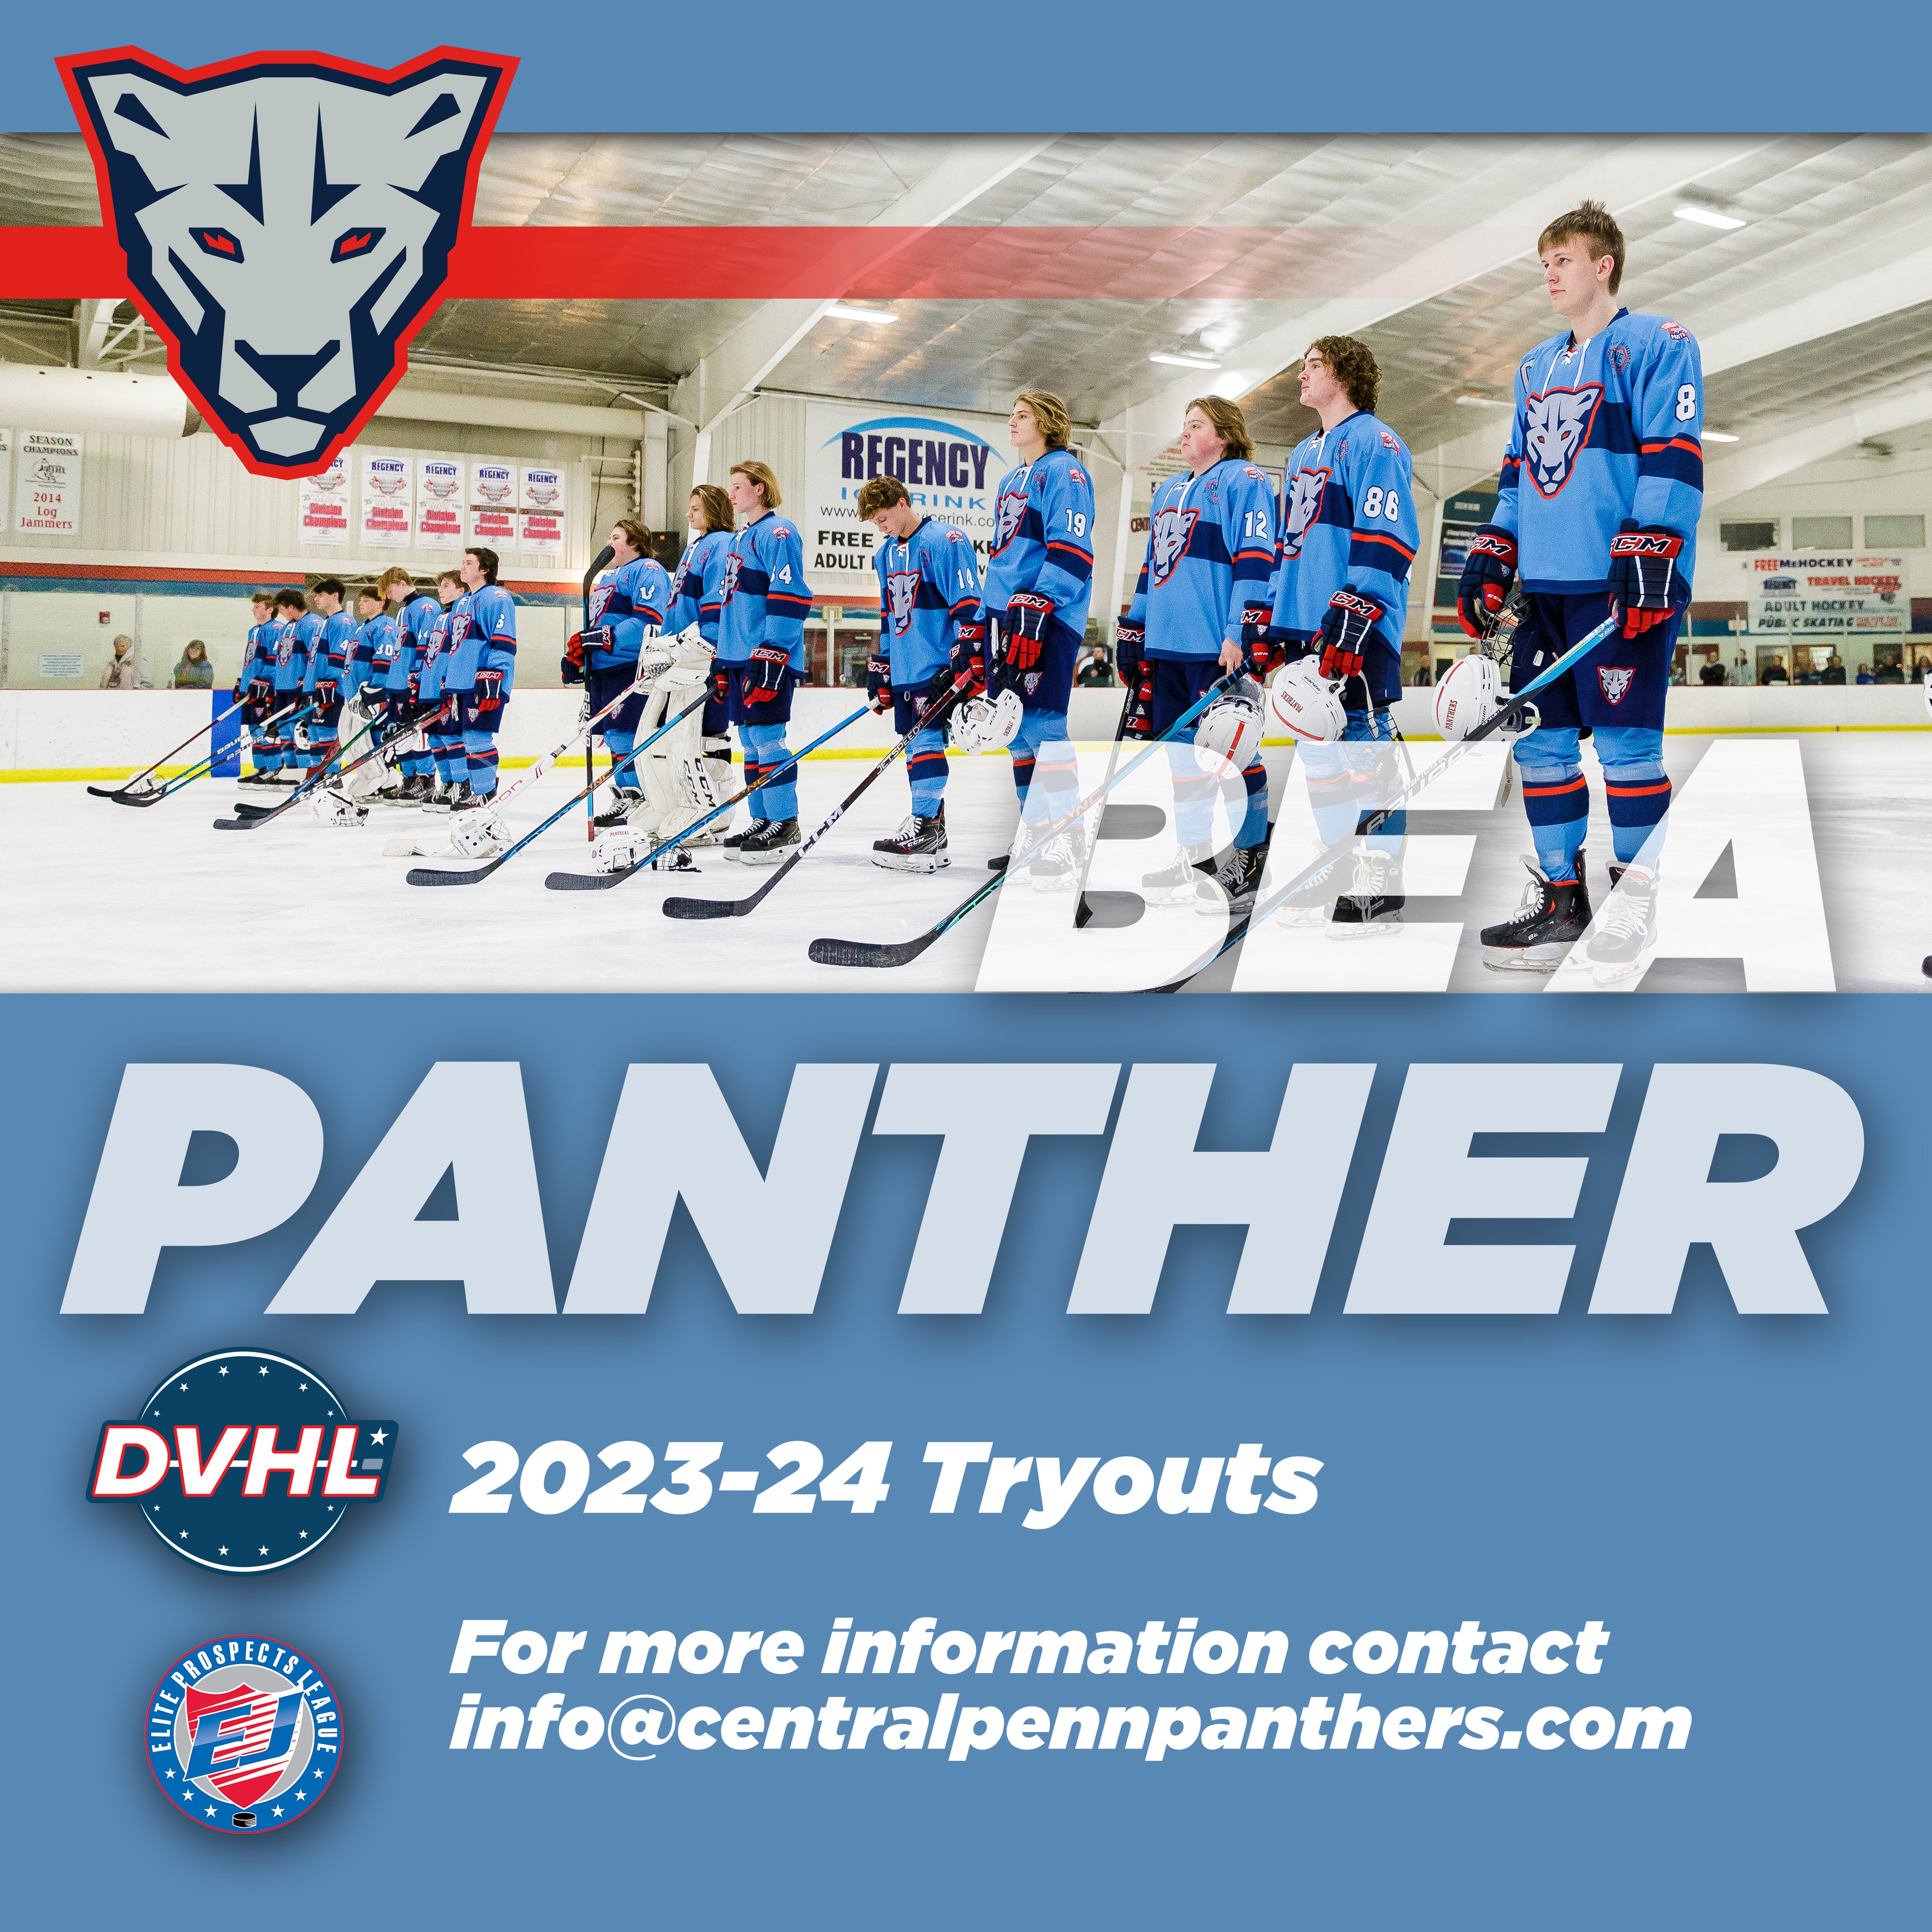 SHOP – Central Penn Panthers Ice Hockey Club